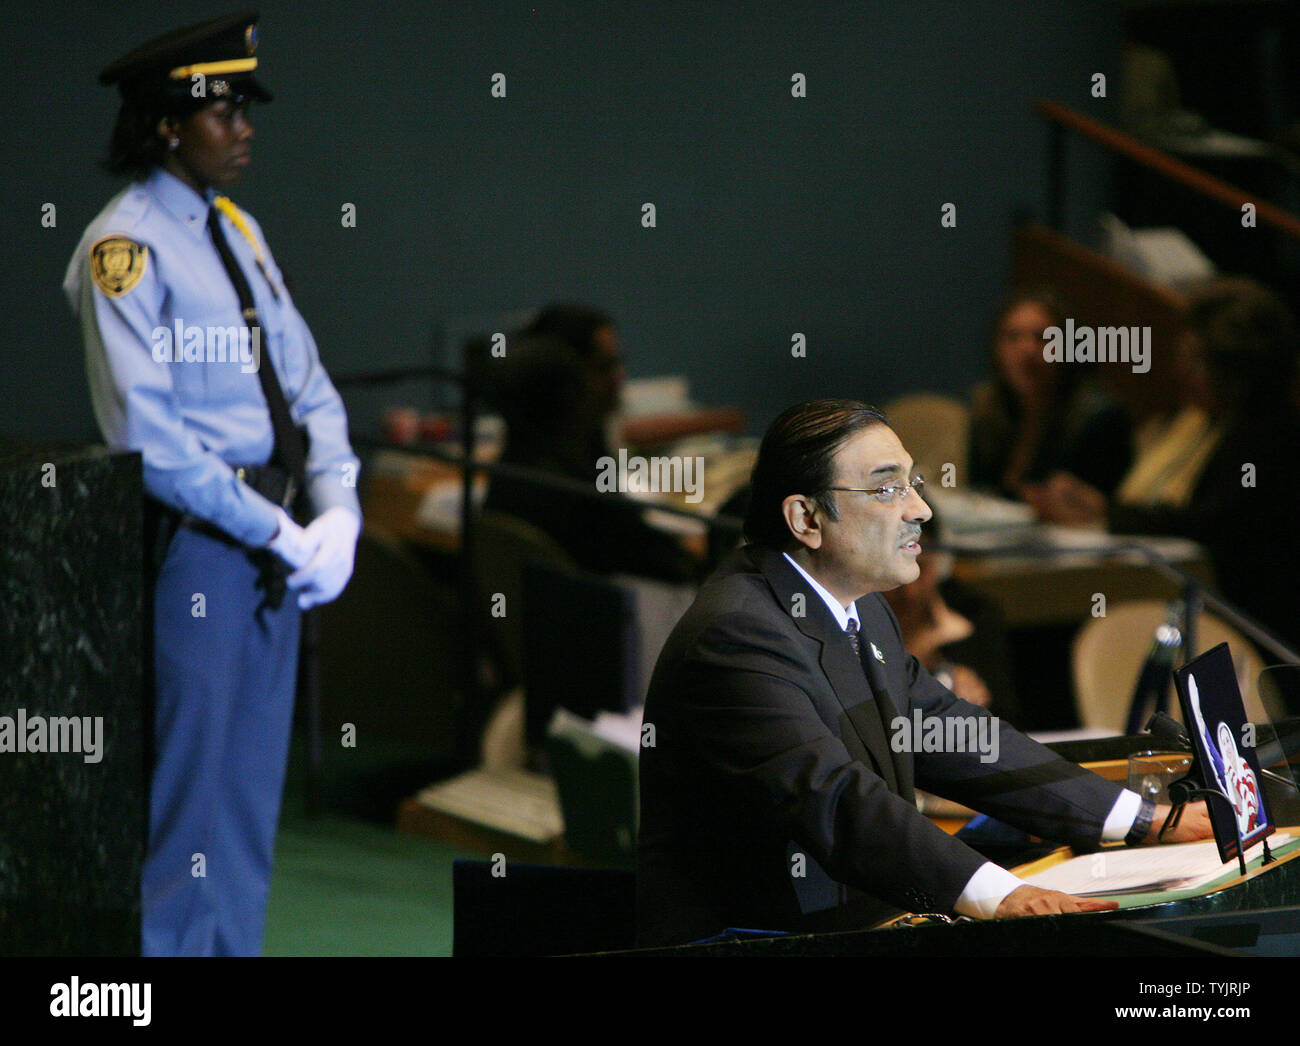 Asif Ali Zardari, President of Pakistan and husband of Benazir Bhutto, addresses the 63rd session of the General Assembly at the United Nations on September 25, 2008 in New York City. (UPI Photo/Monika Graff) Stock Photo